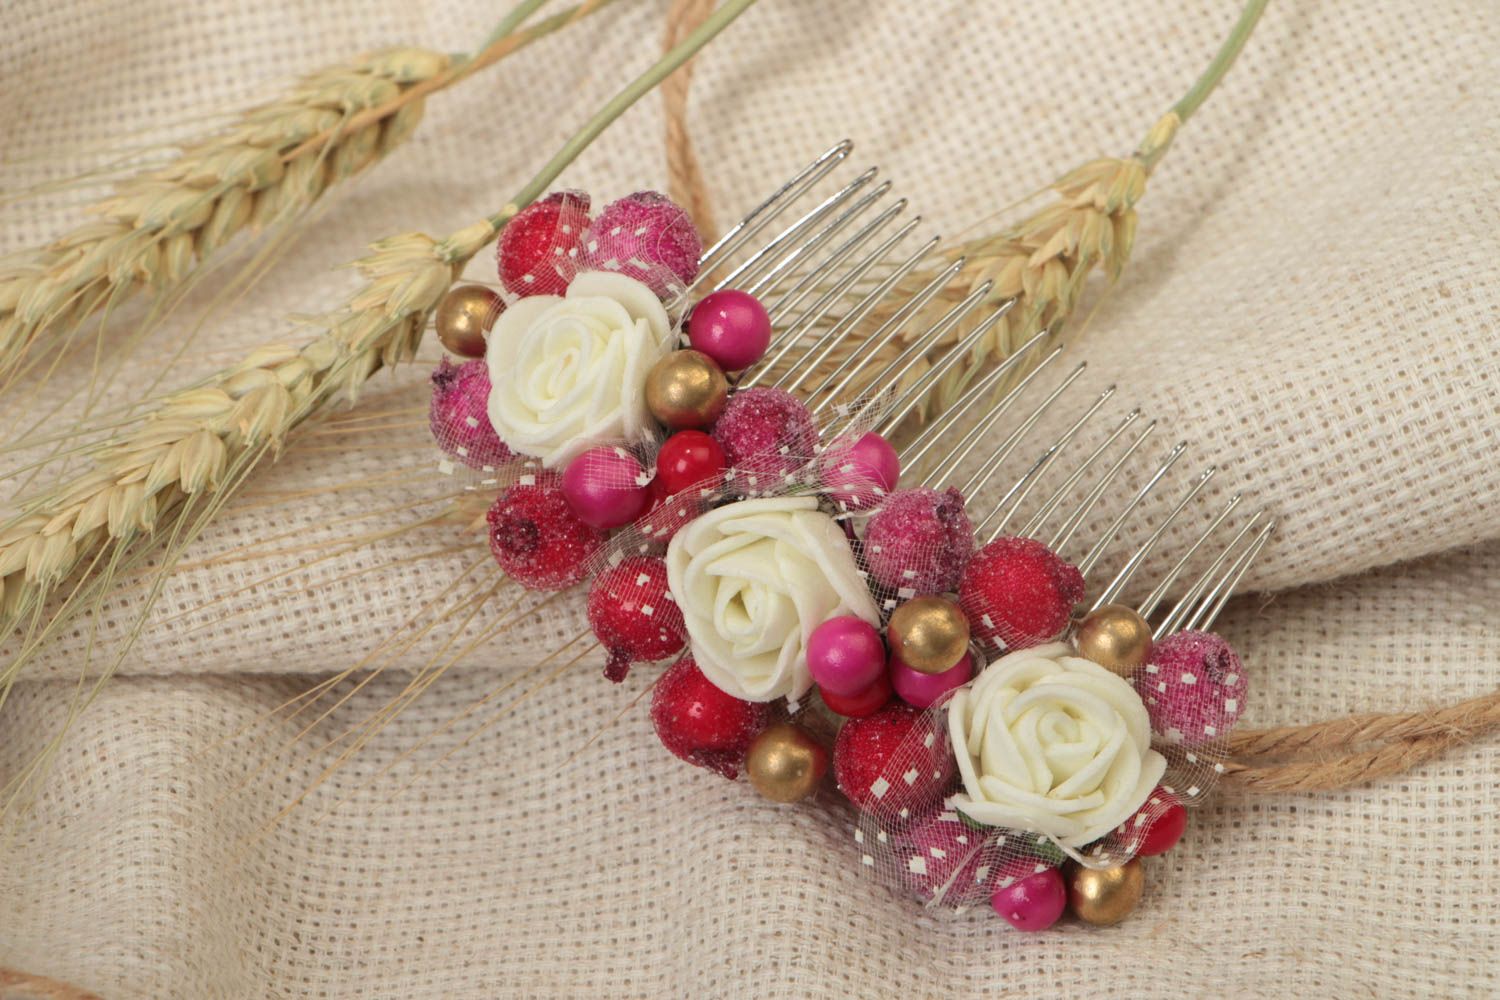 Handmade metal decorative hair comb with artificial colorful berries and flowers photo 1